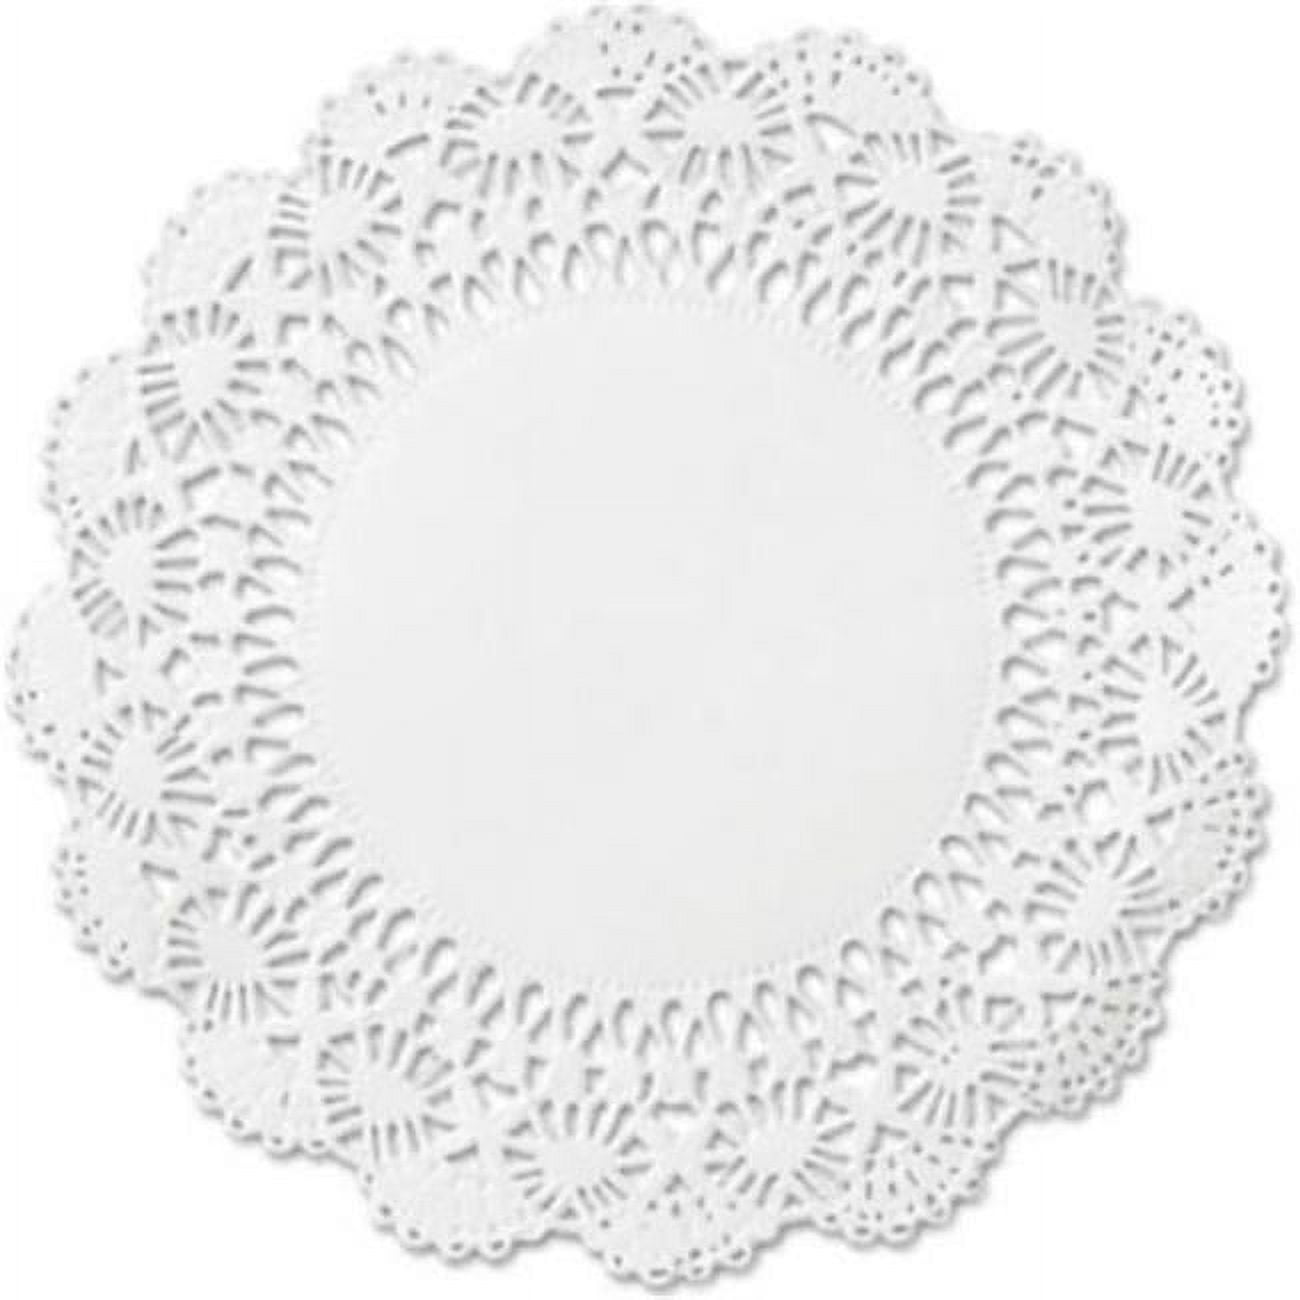 50PCS 3.5inch -13.5inch Assorted Sizes Round Paper Lace Table Doilies White  Decorative Tableware Placemats Mats